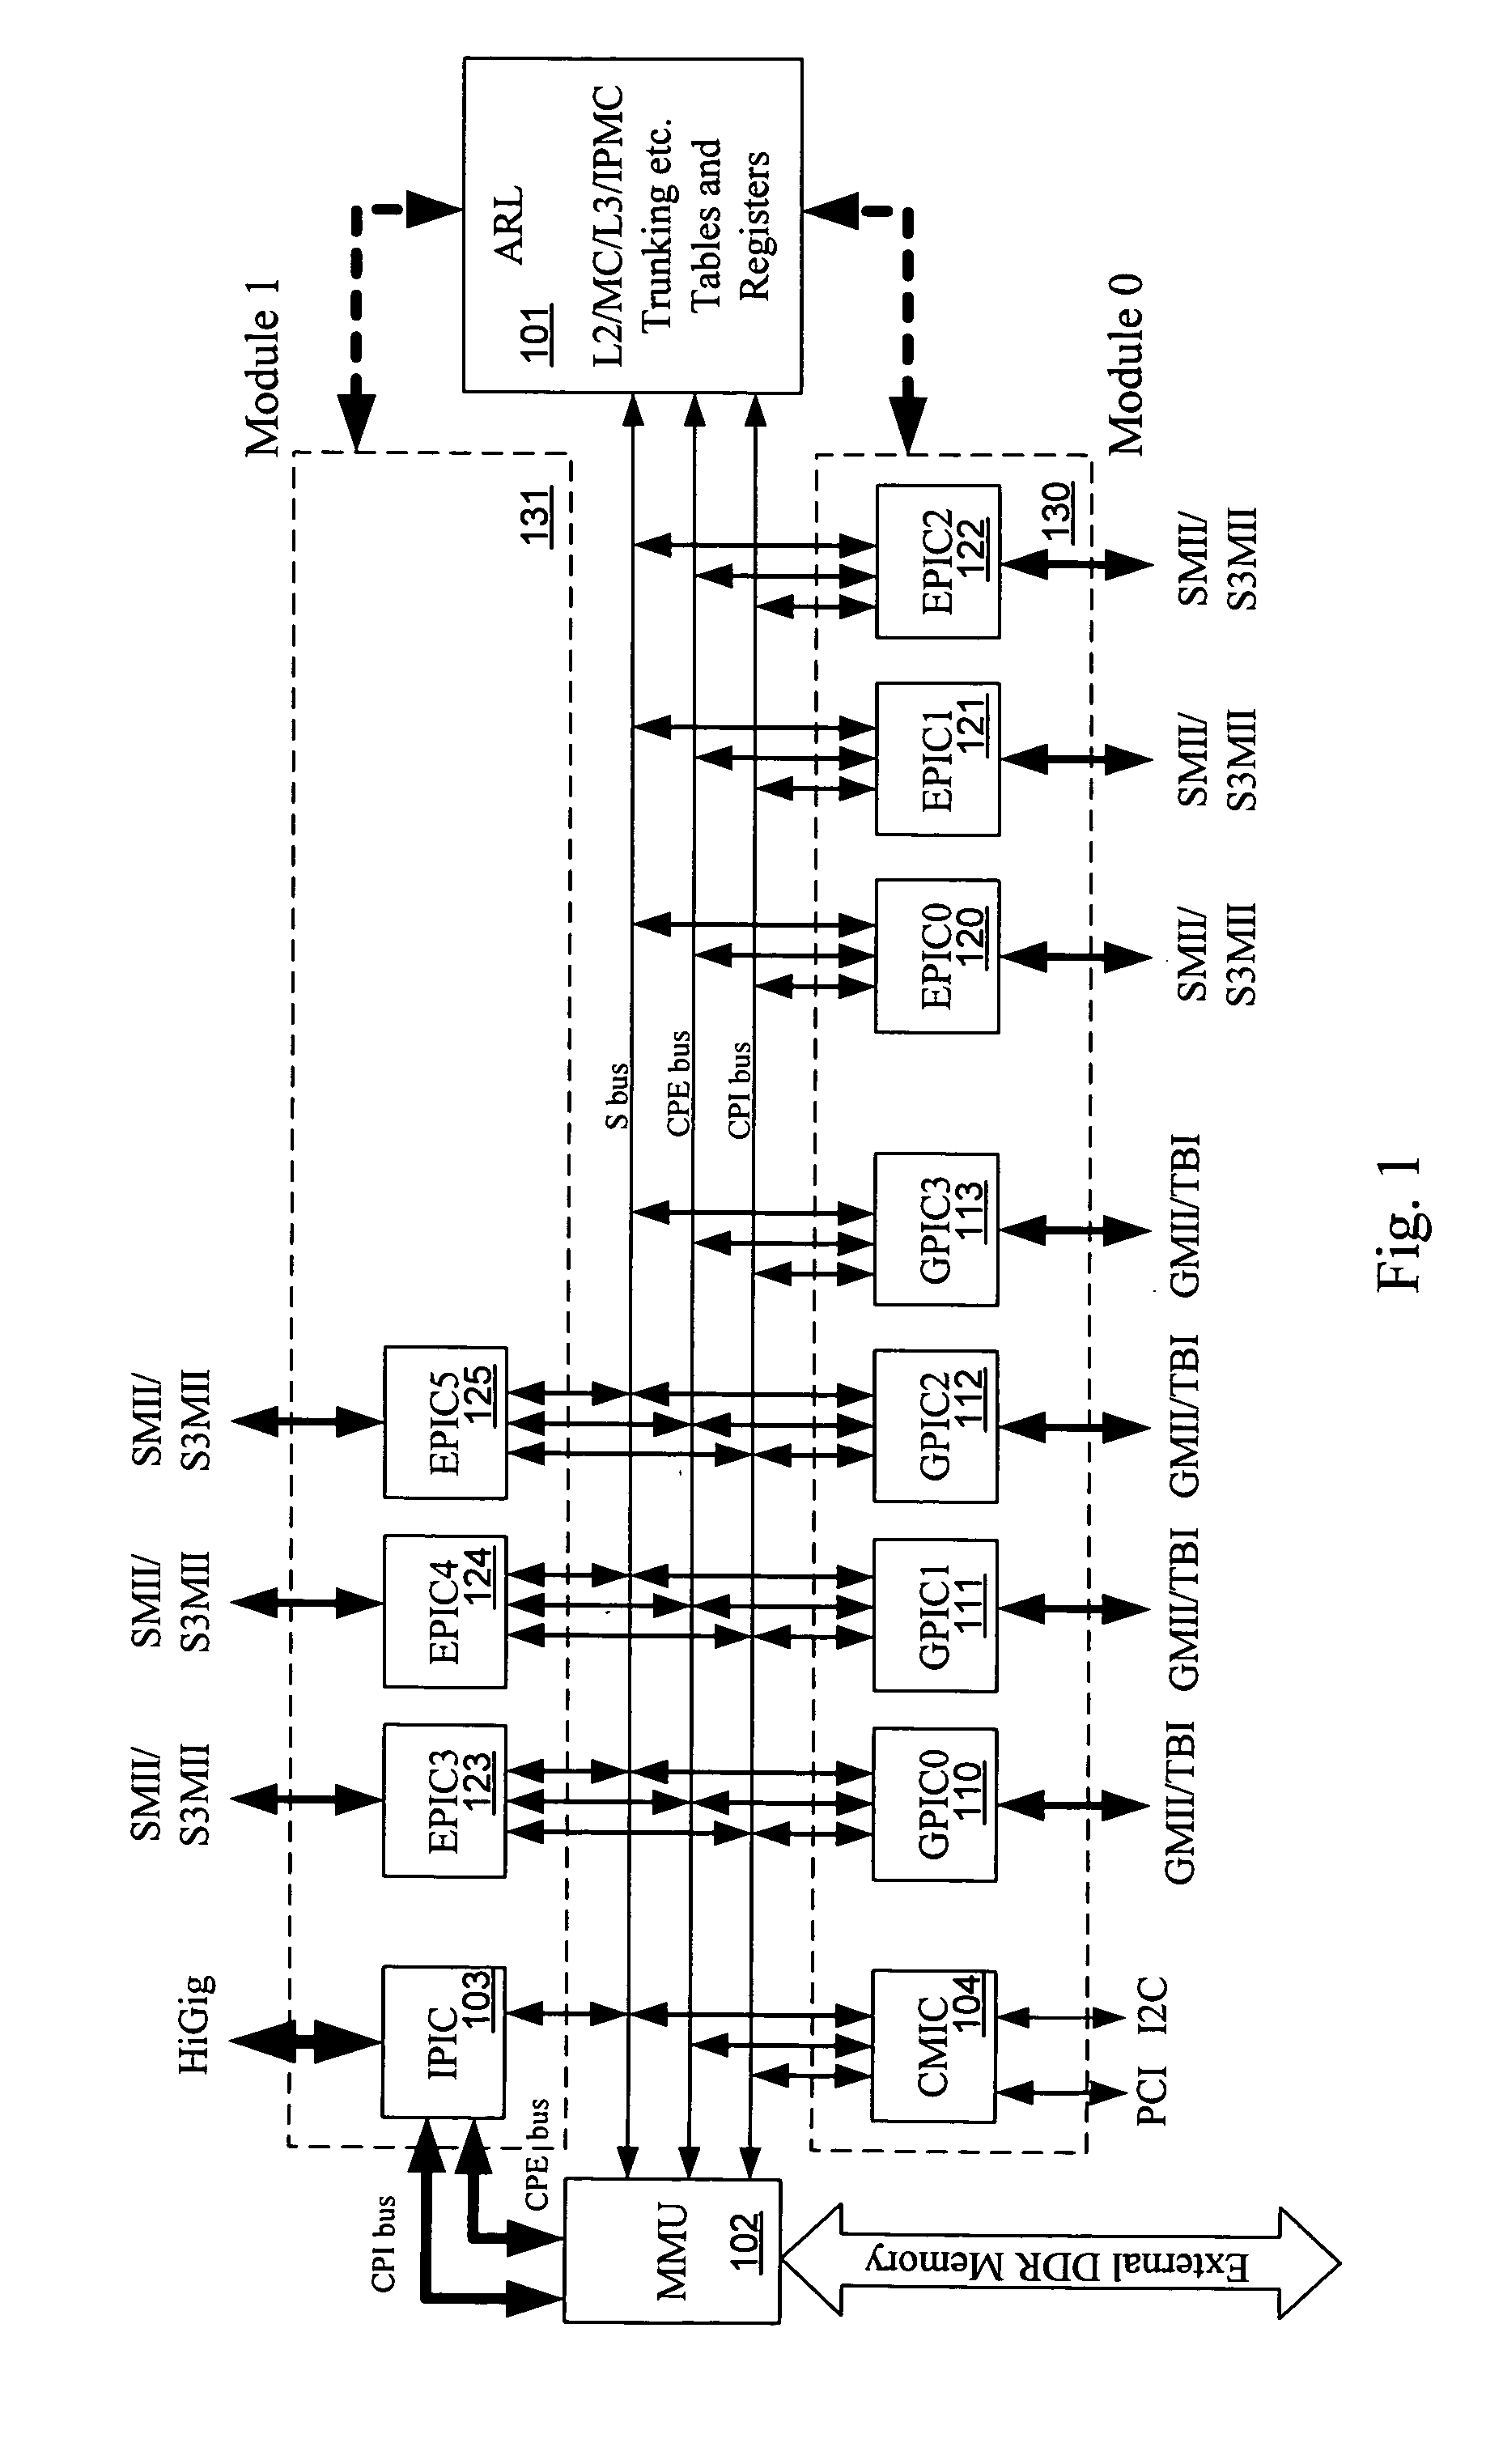 Fast filtering processor for a highly integrated network device